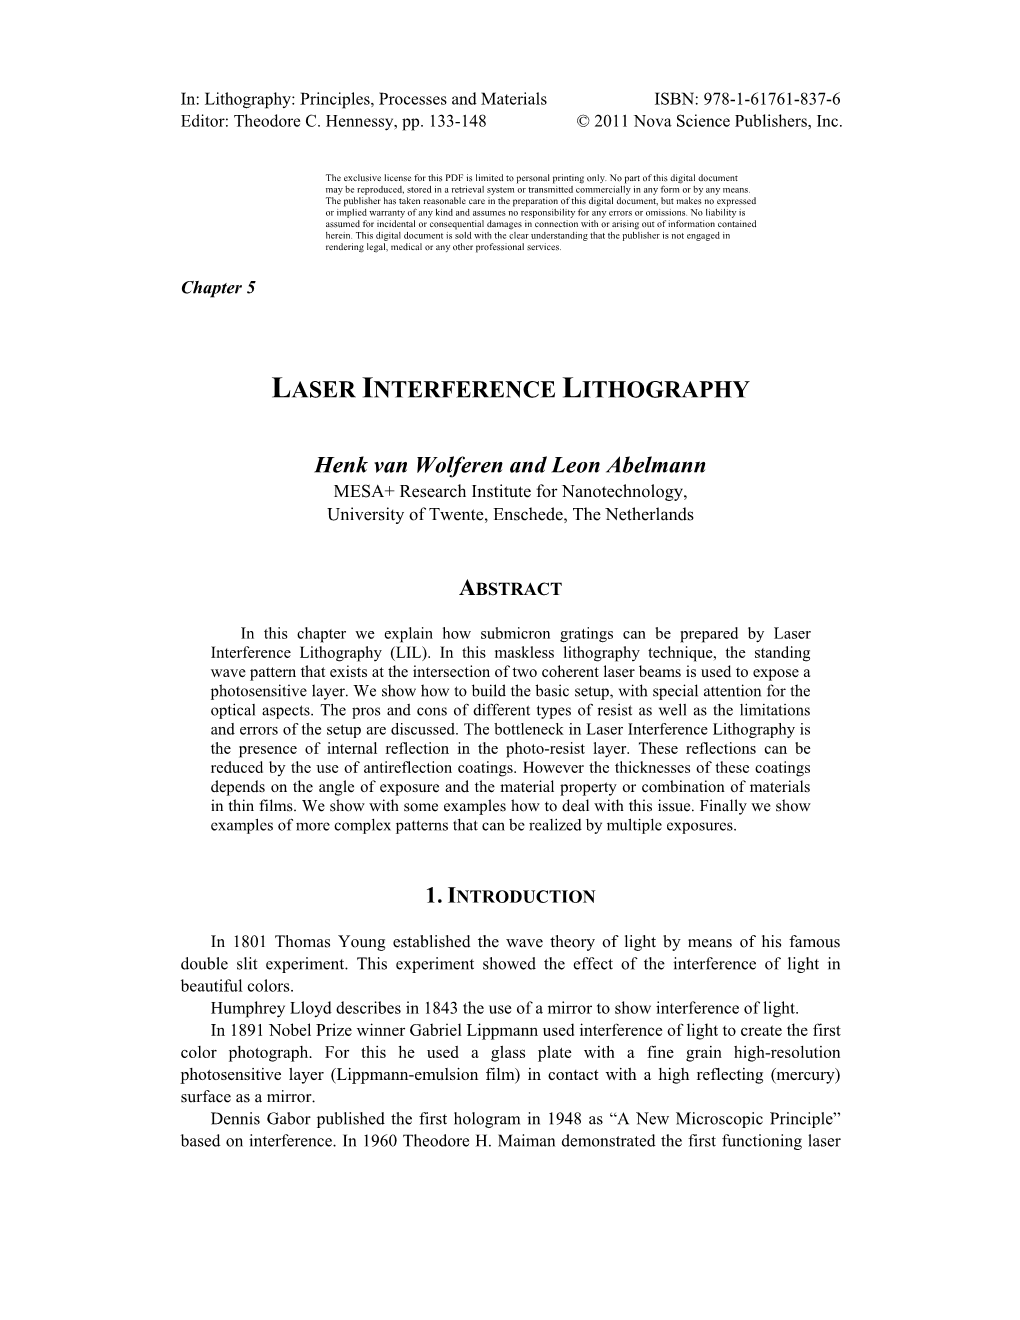 Laser Interference Lithography